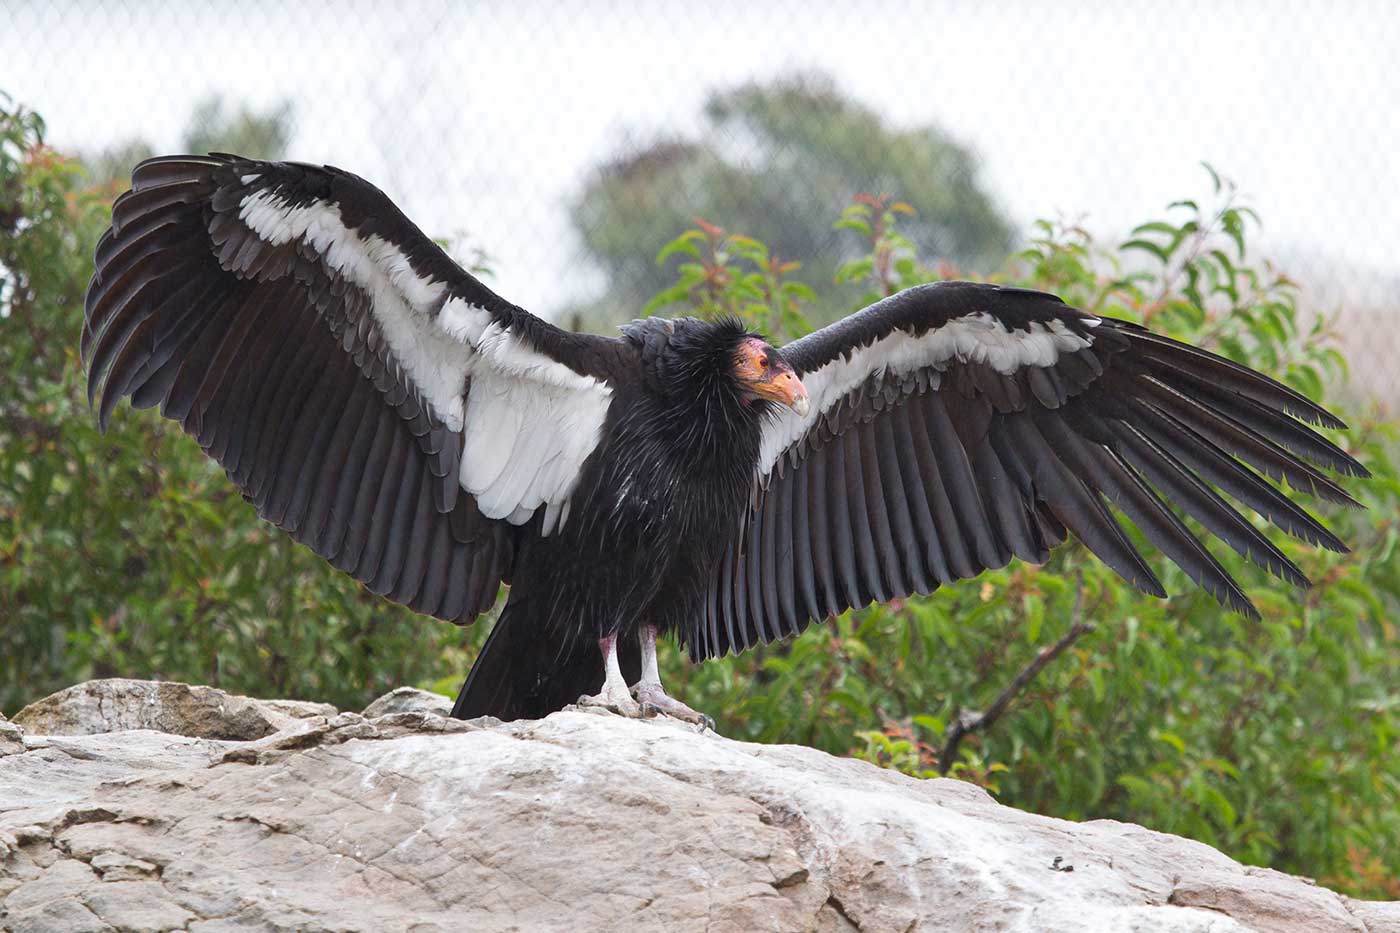 Condor at rest, wings spanned.